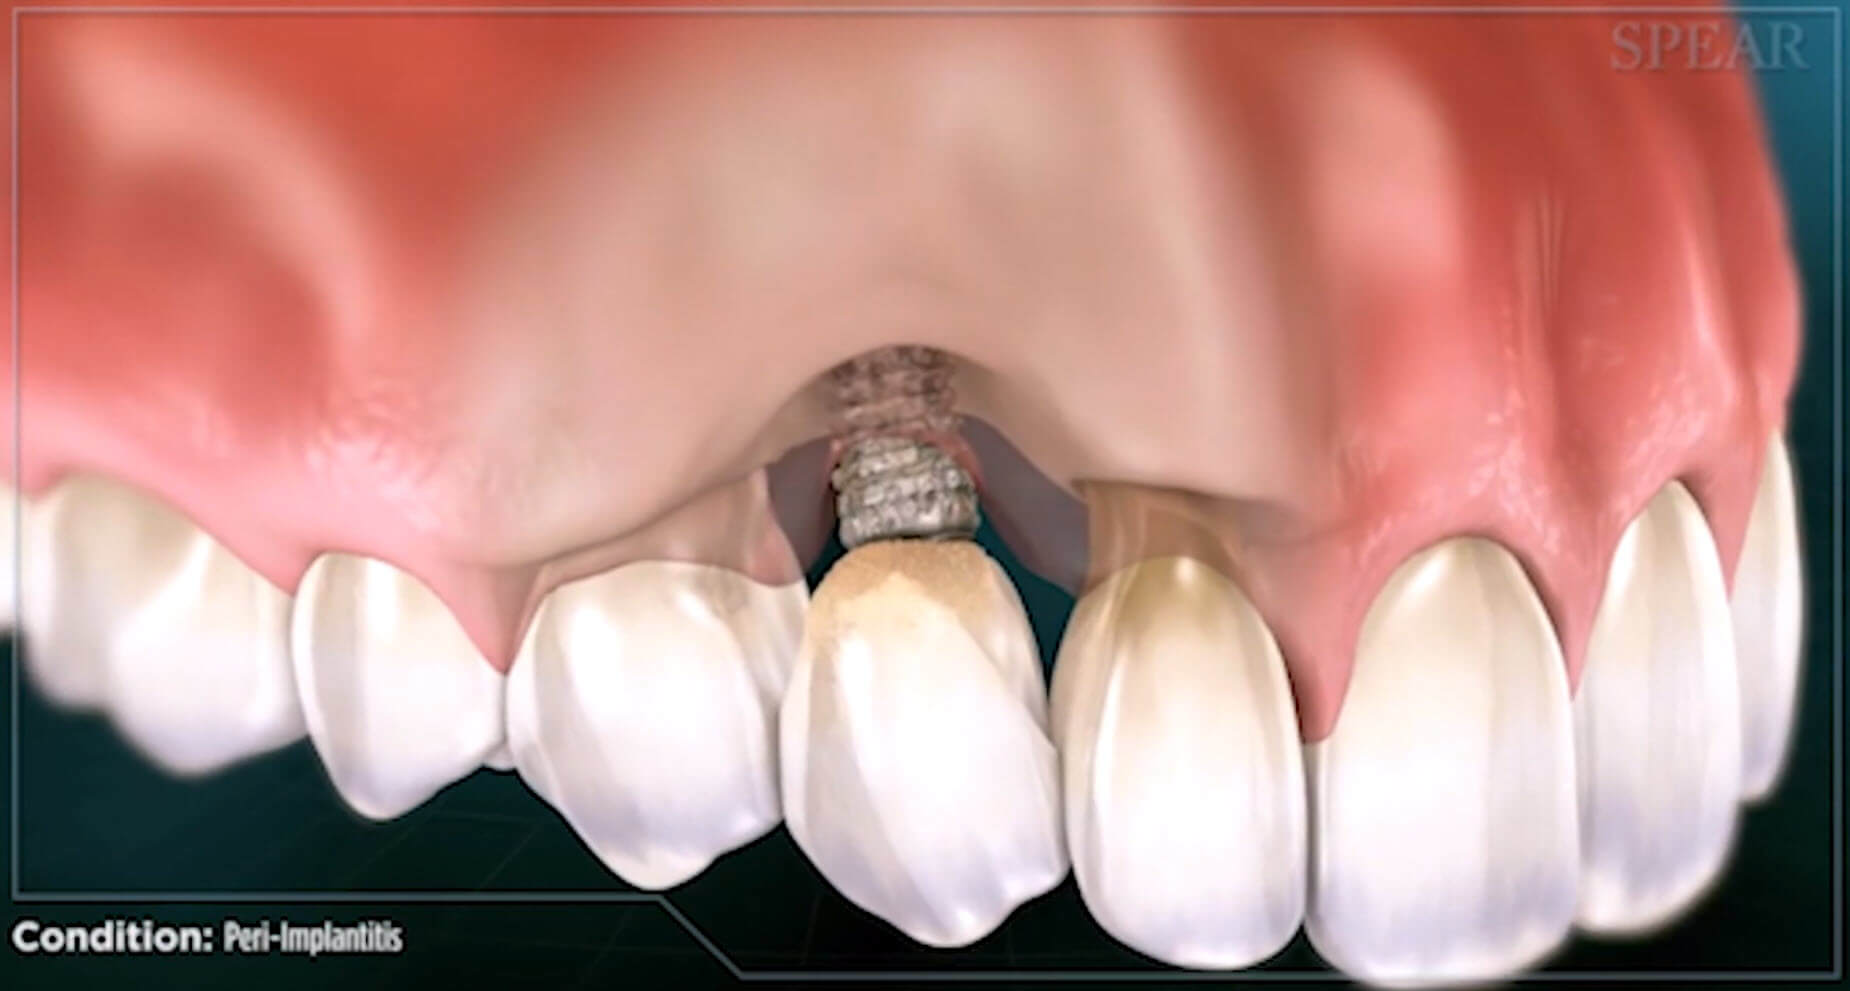 An image of a tooth implant exposed due to peri-implantitis